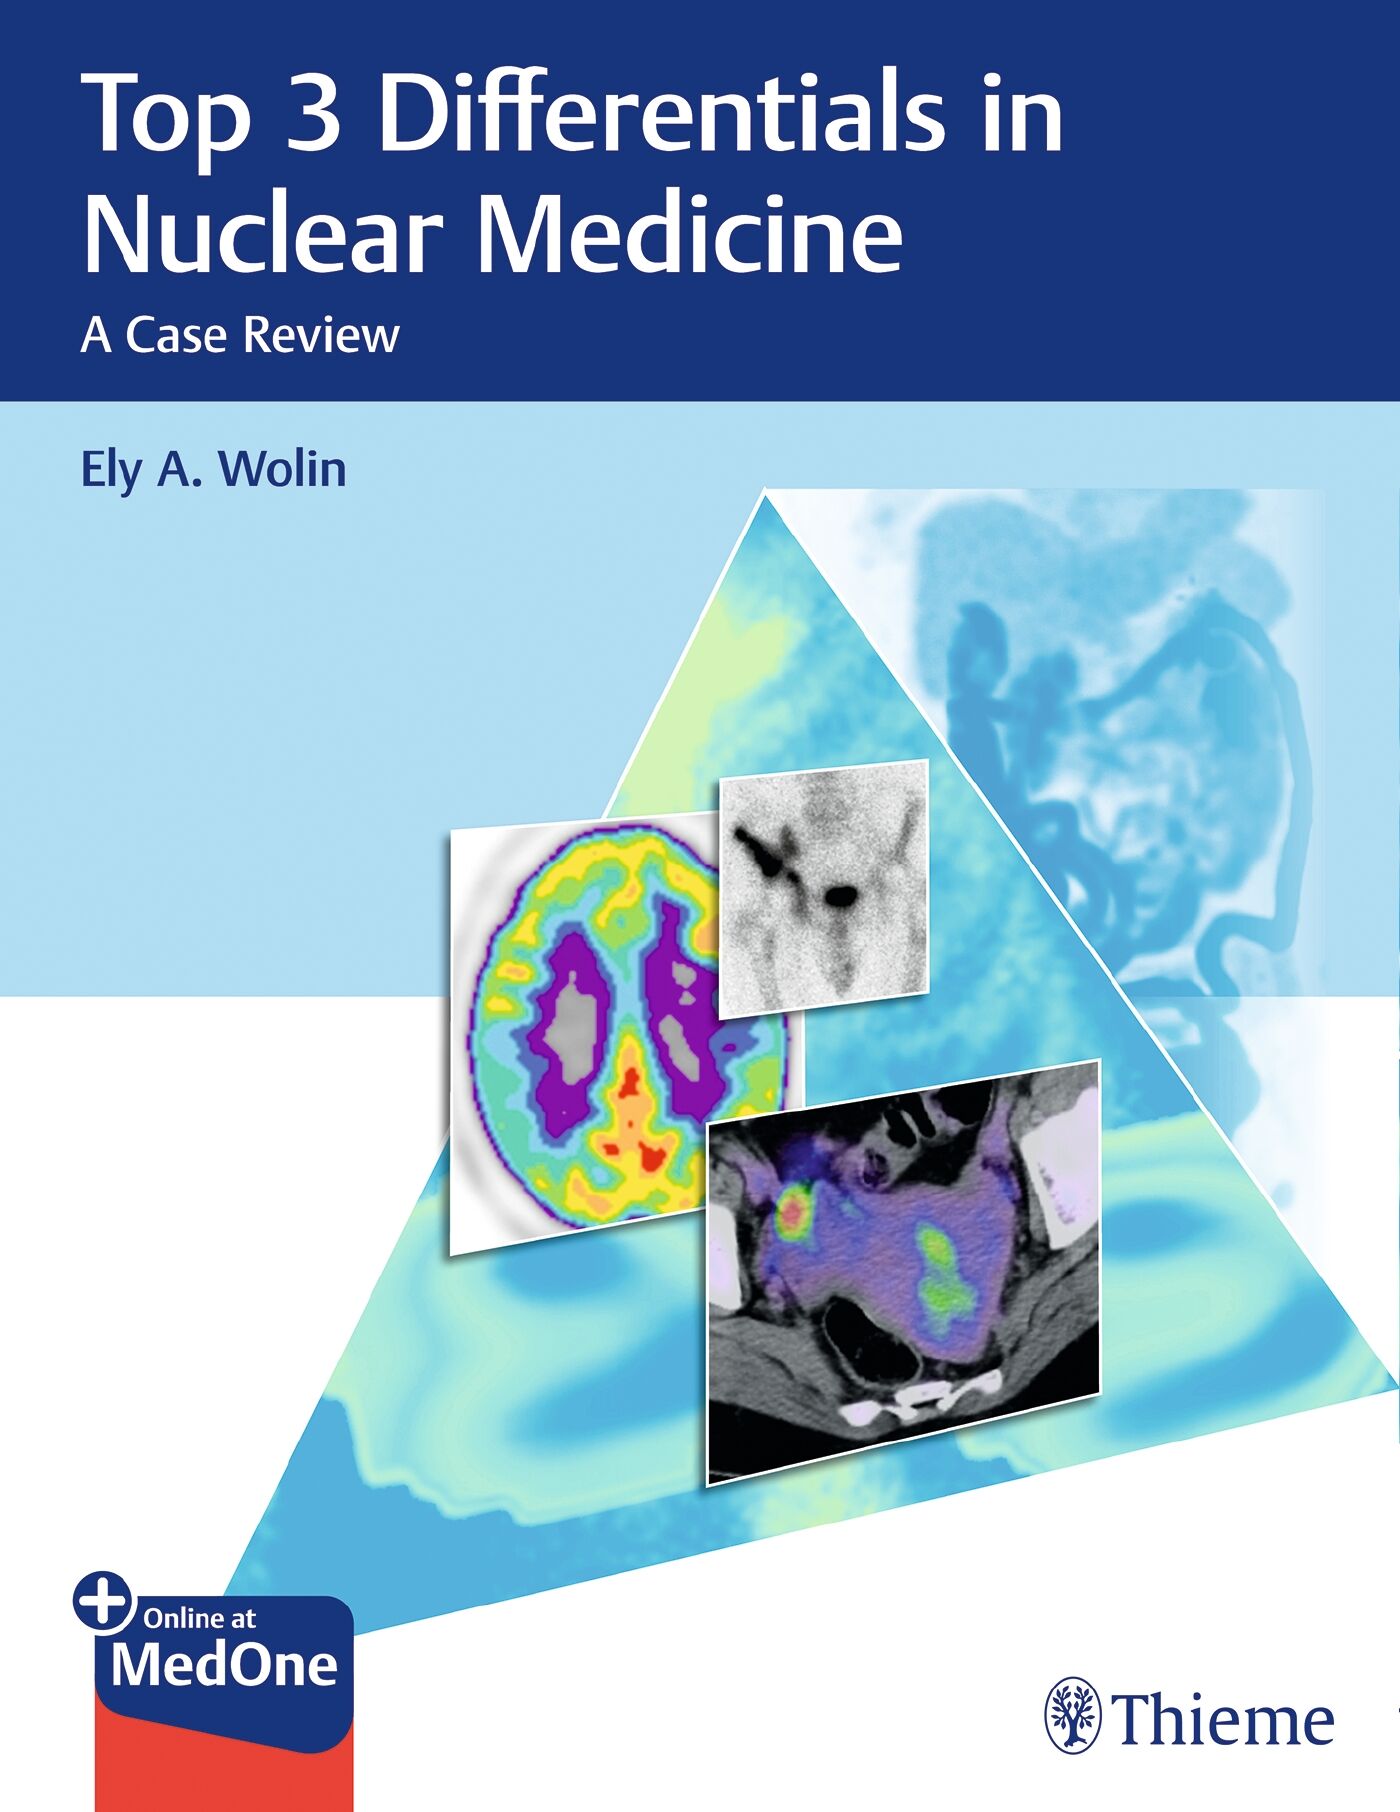 Top 3 Differentials in Nuclear Medicine, 9781626233546